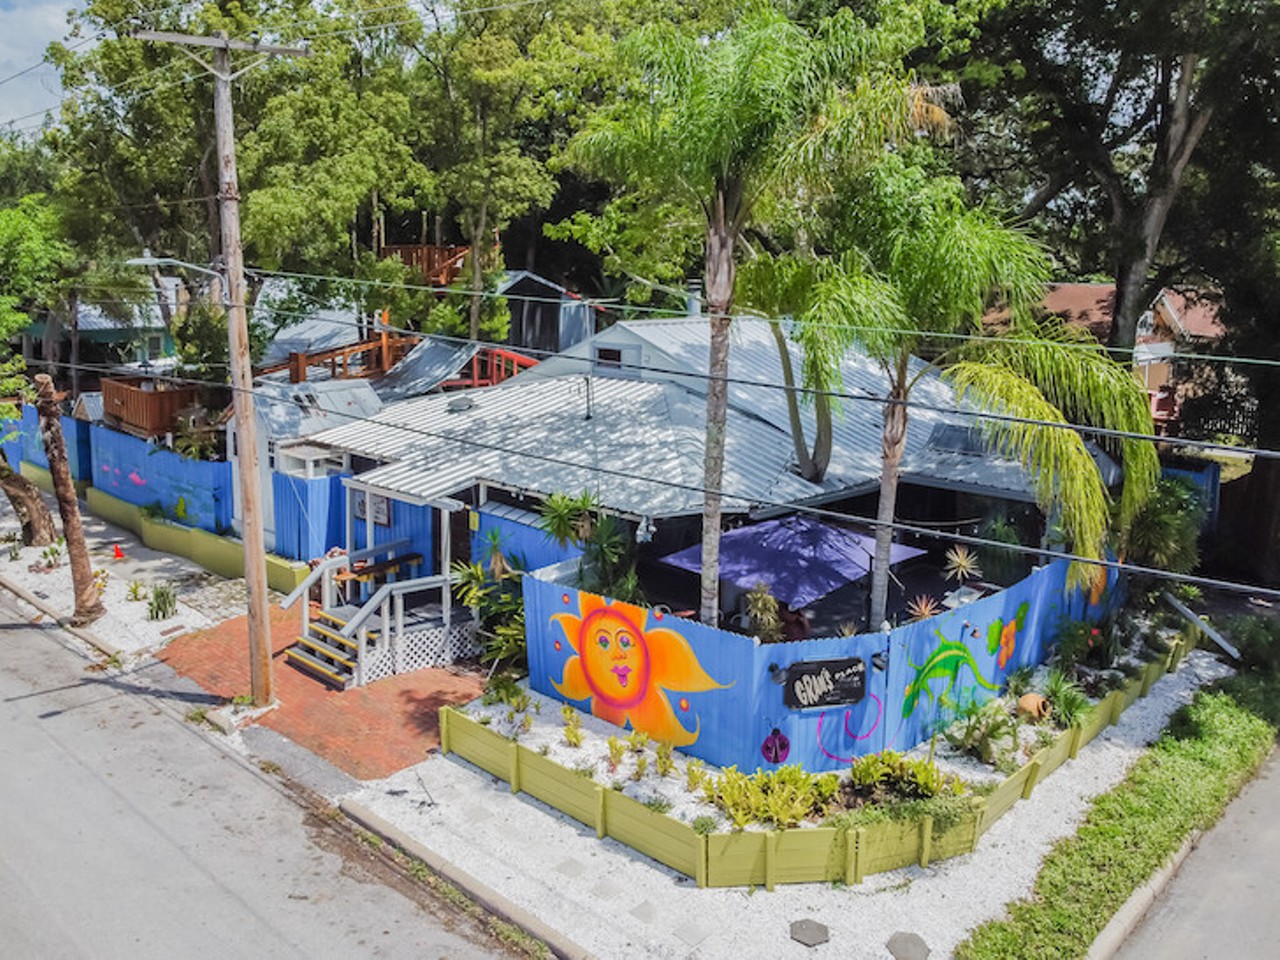 Tampa Heights' iconic hostel Gram's Place is now for sale